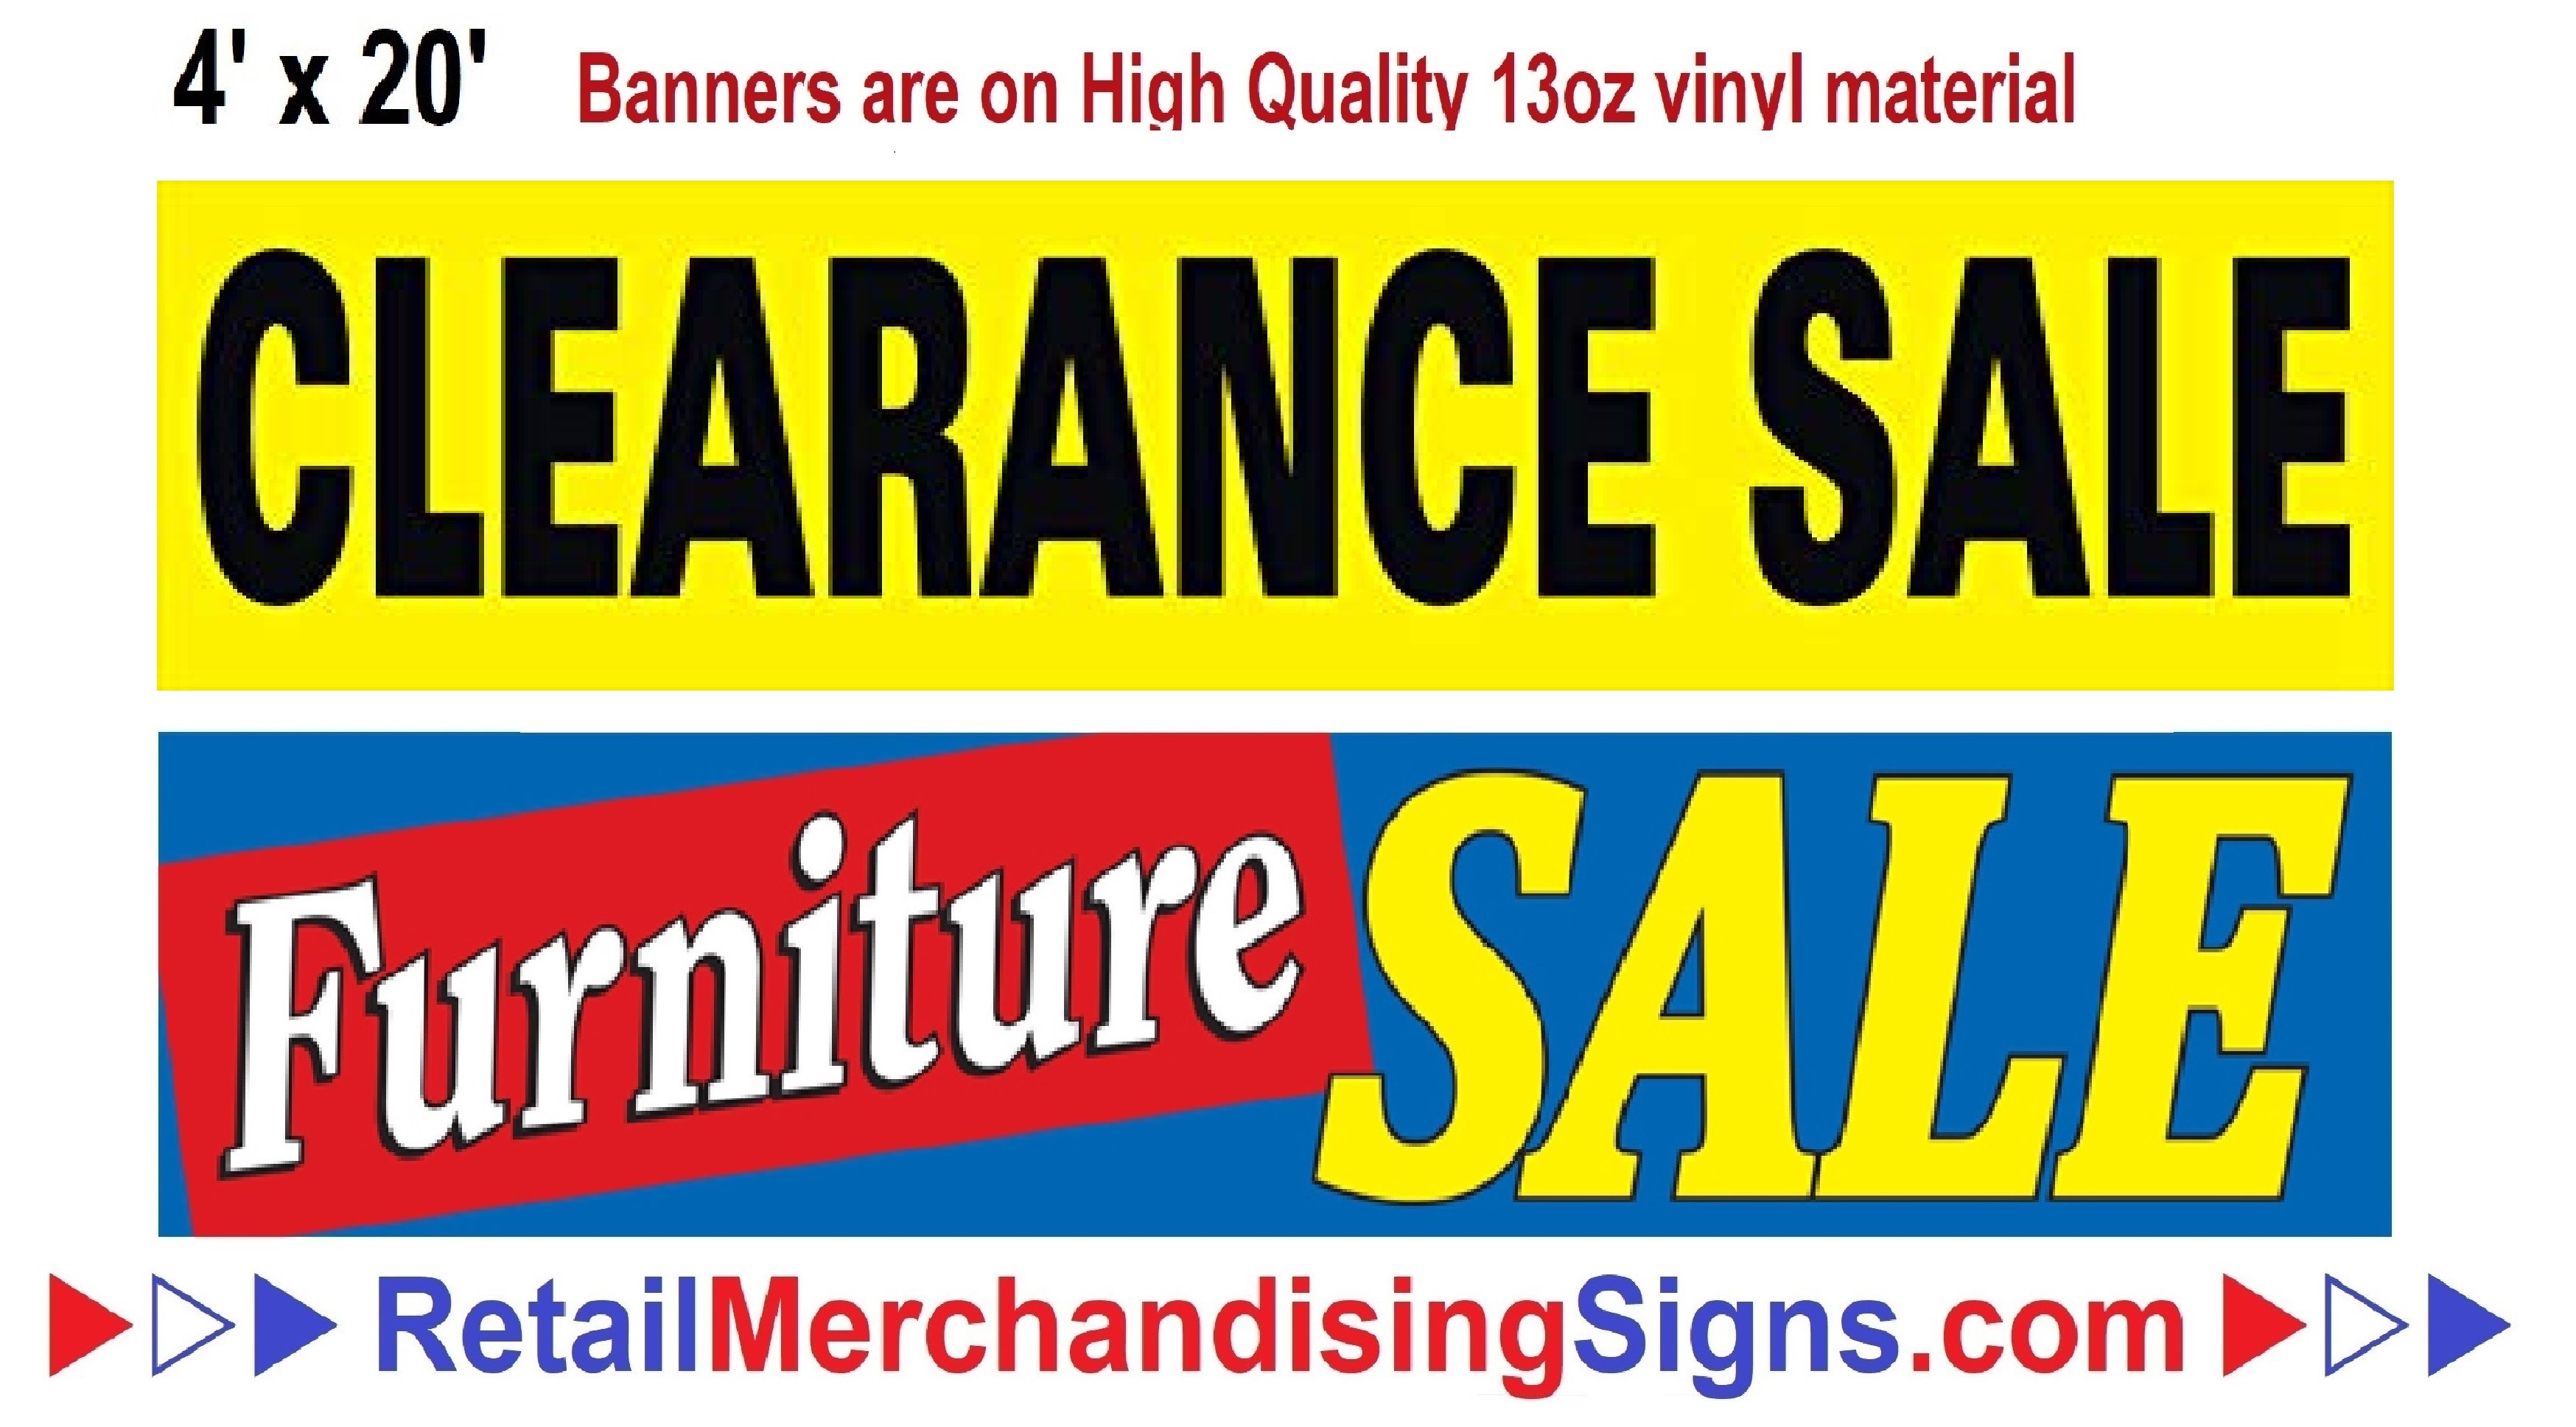 4'x10' CLEARANCE SALE BANNER XL Outdoor Sign Discount Markdowns Retail  Store Big